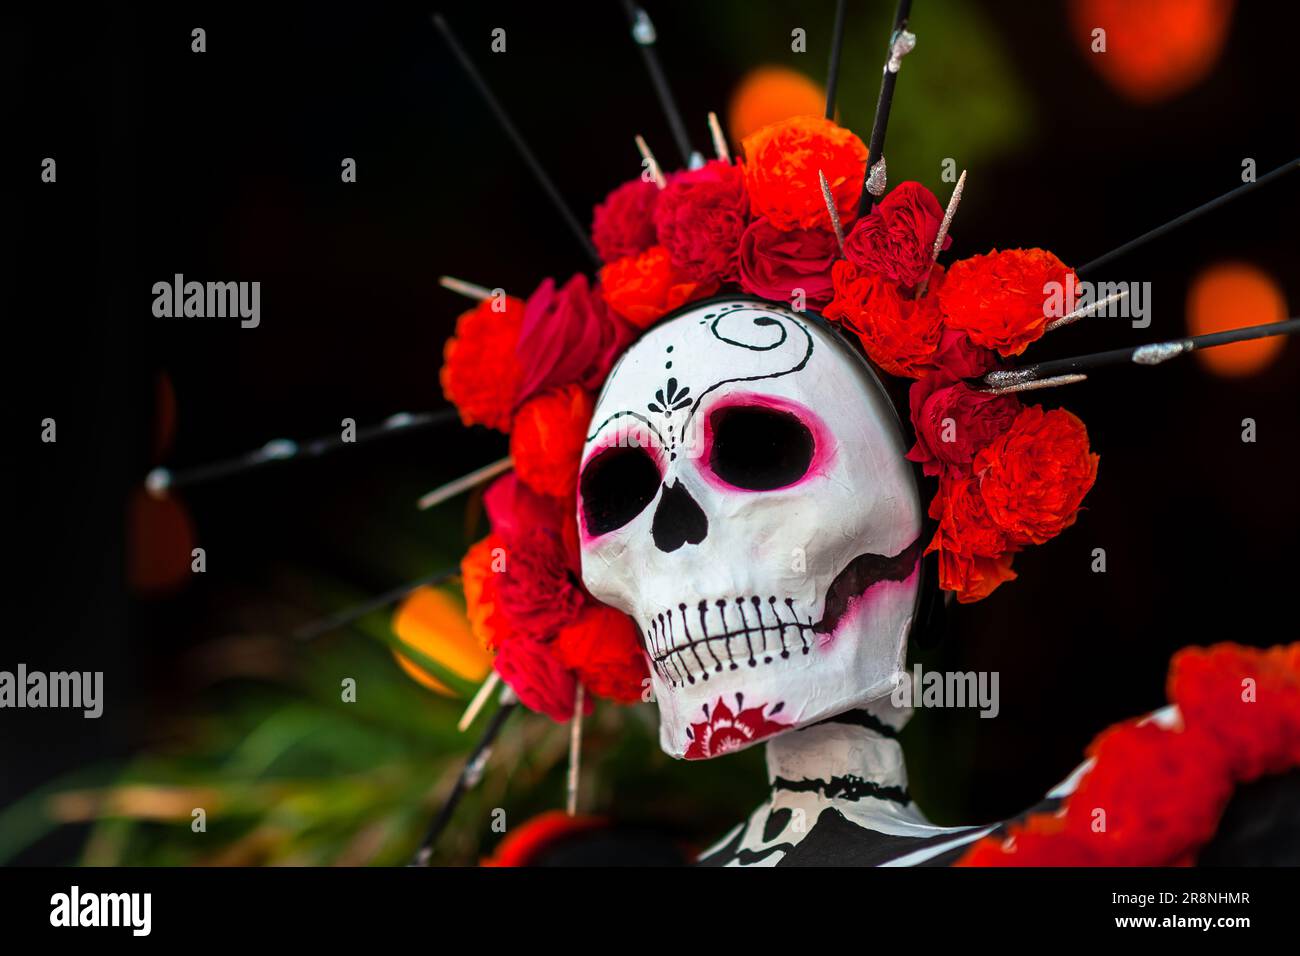 A flower-decorated Calaca (skeleton) figure is seen installed on the street during the Day of the Dead festivities in Morelia, Michoacán, Mexico. Stock Photo